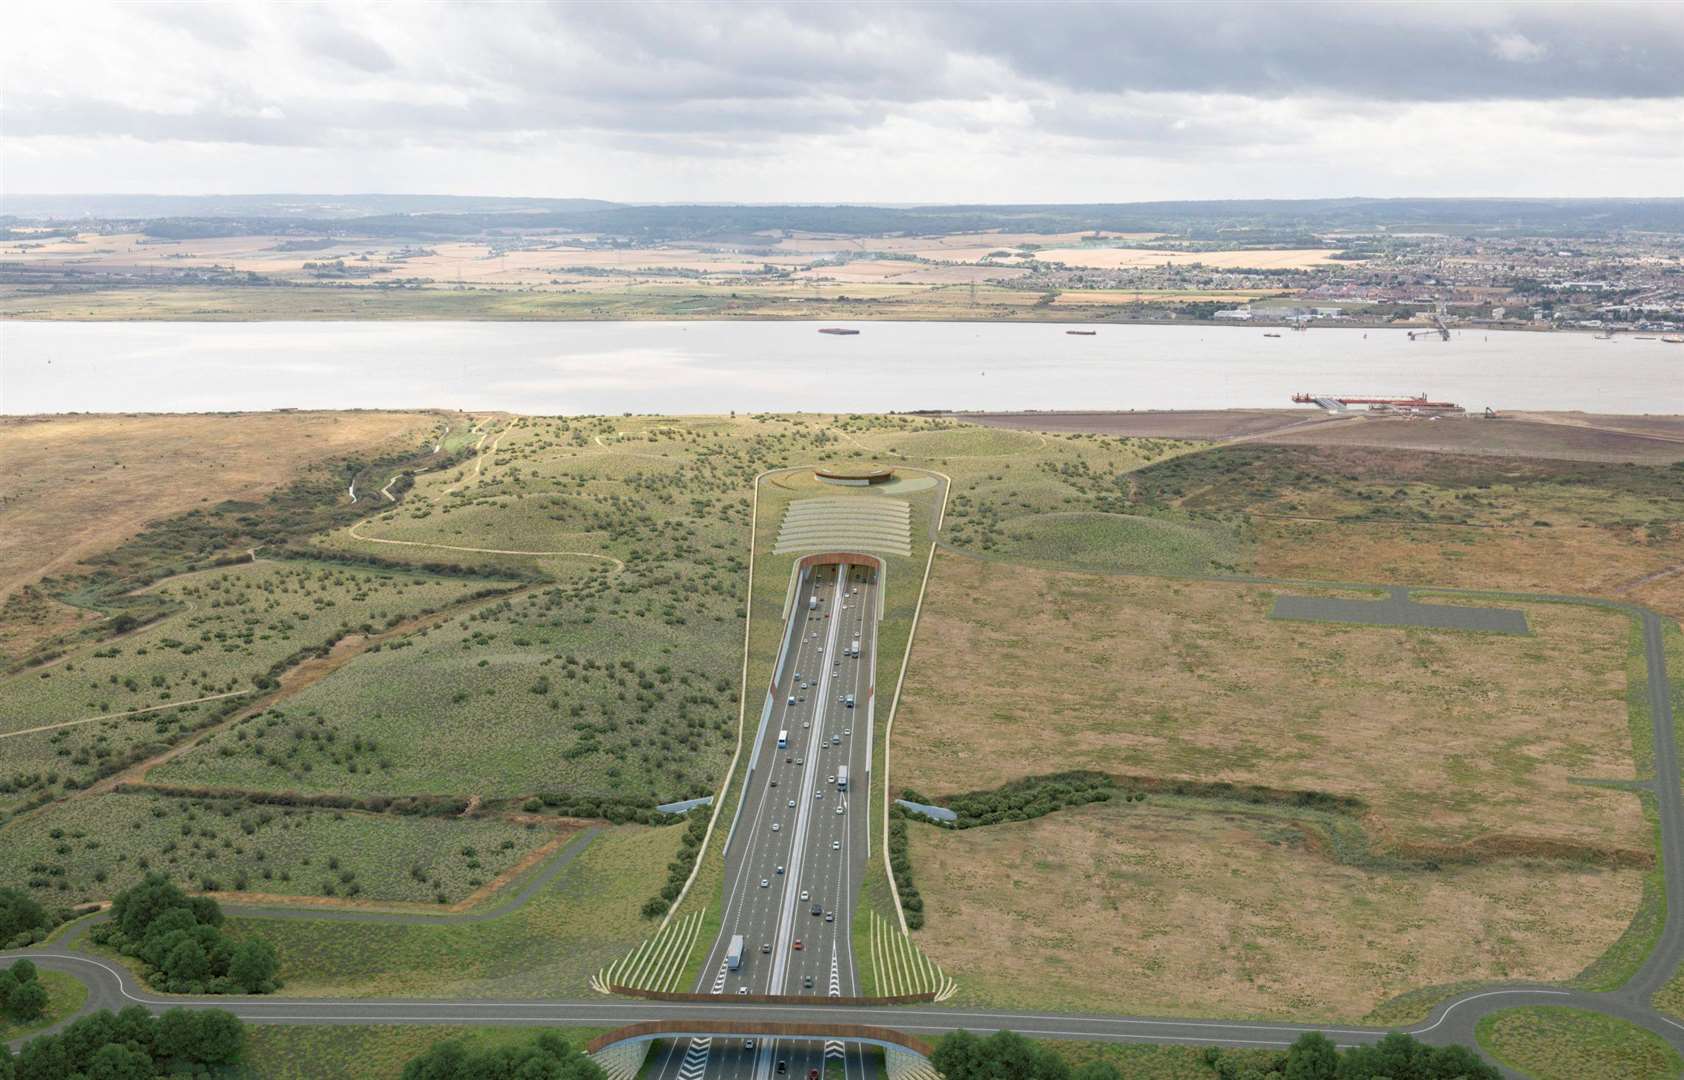 The Lower Thames Crossing is planned to span the Thames linking the east of Gravesend to Essex. Picture: National Highways